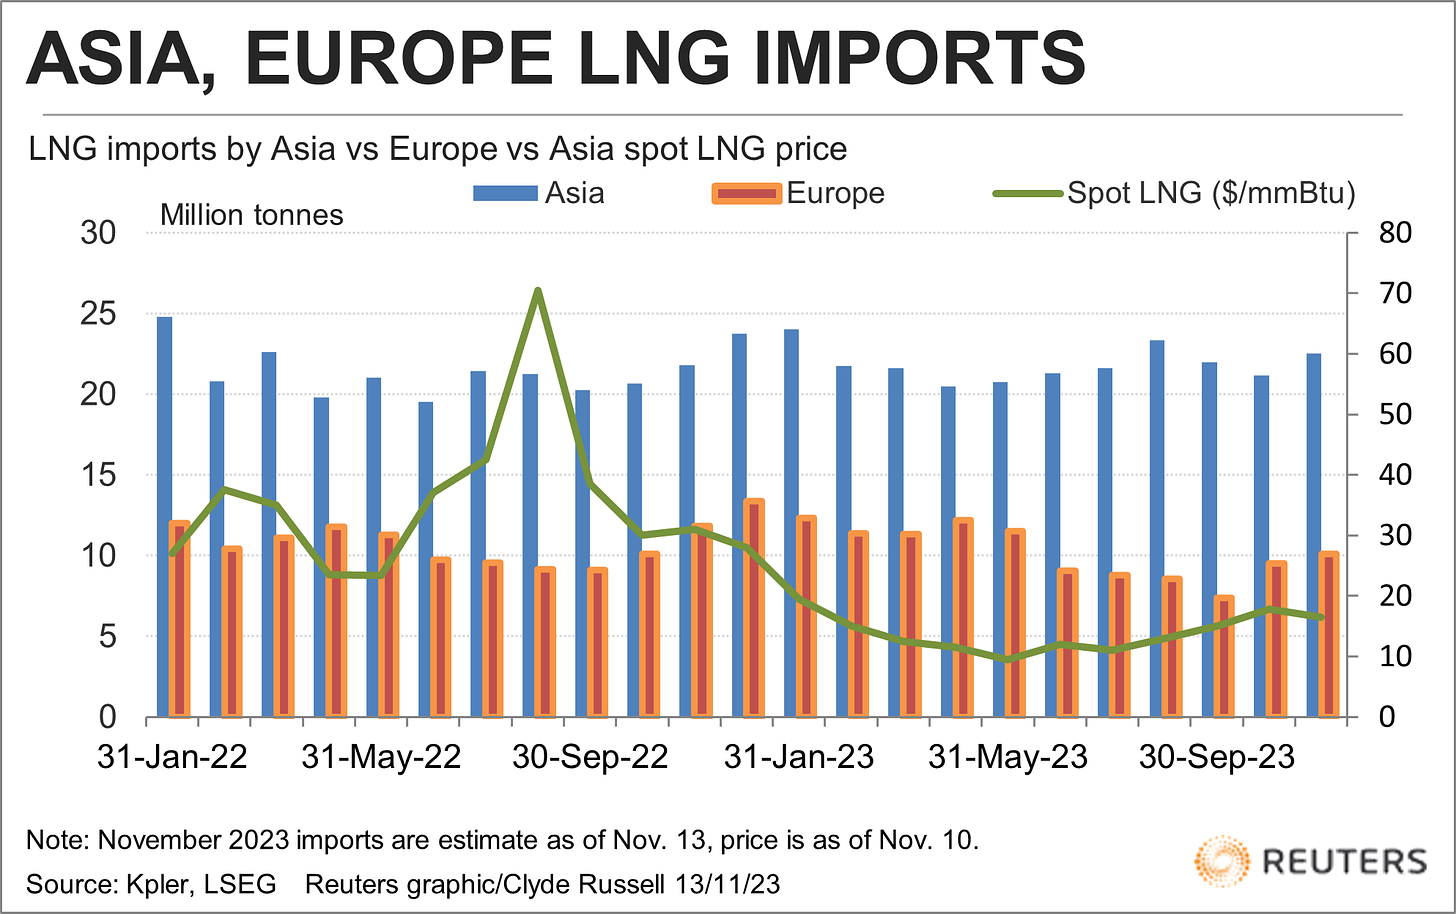 LNG imports by Asia, Europe vs spot Asia price